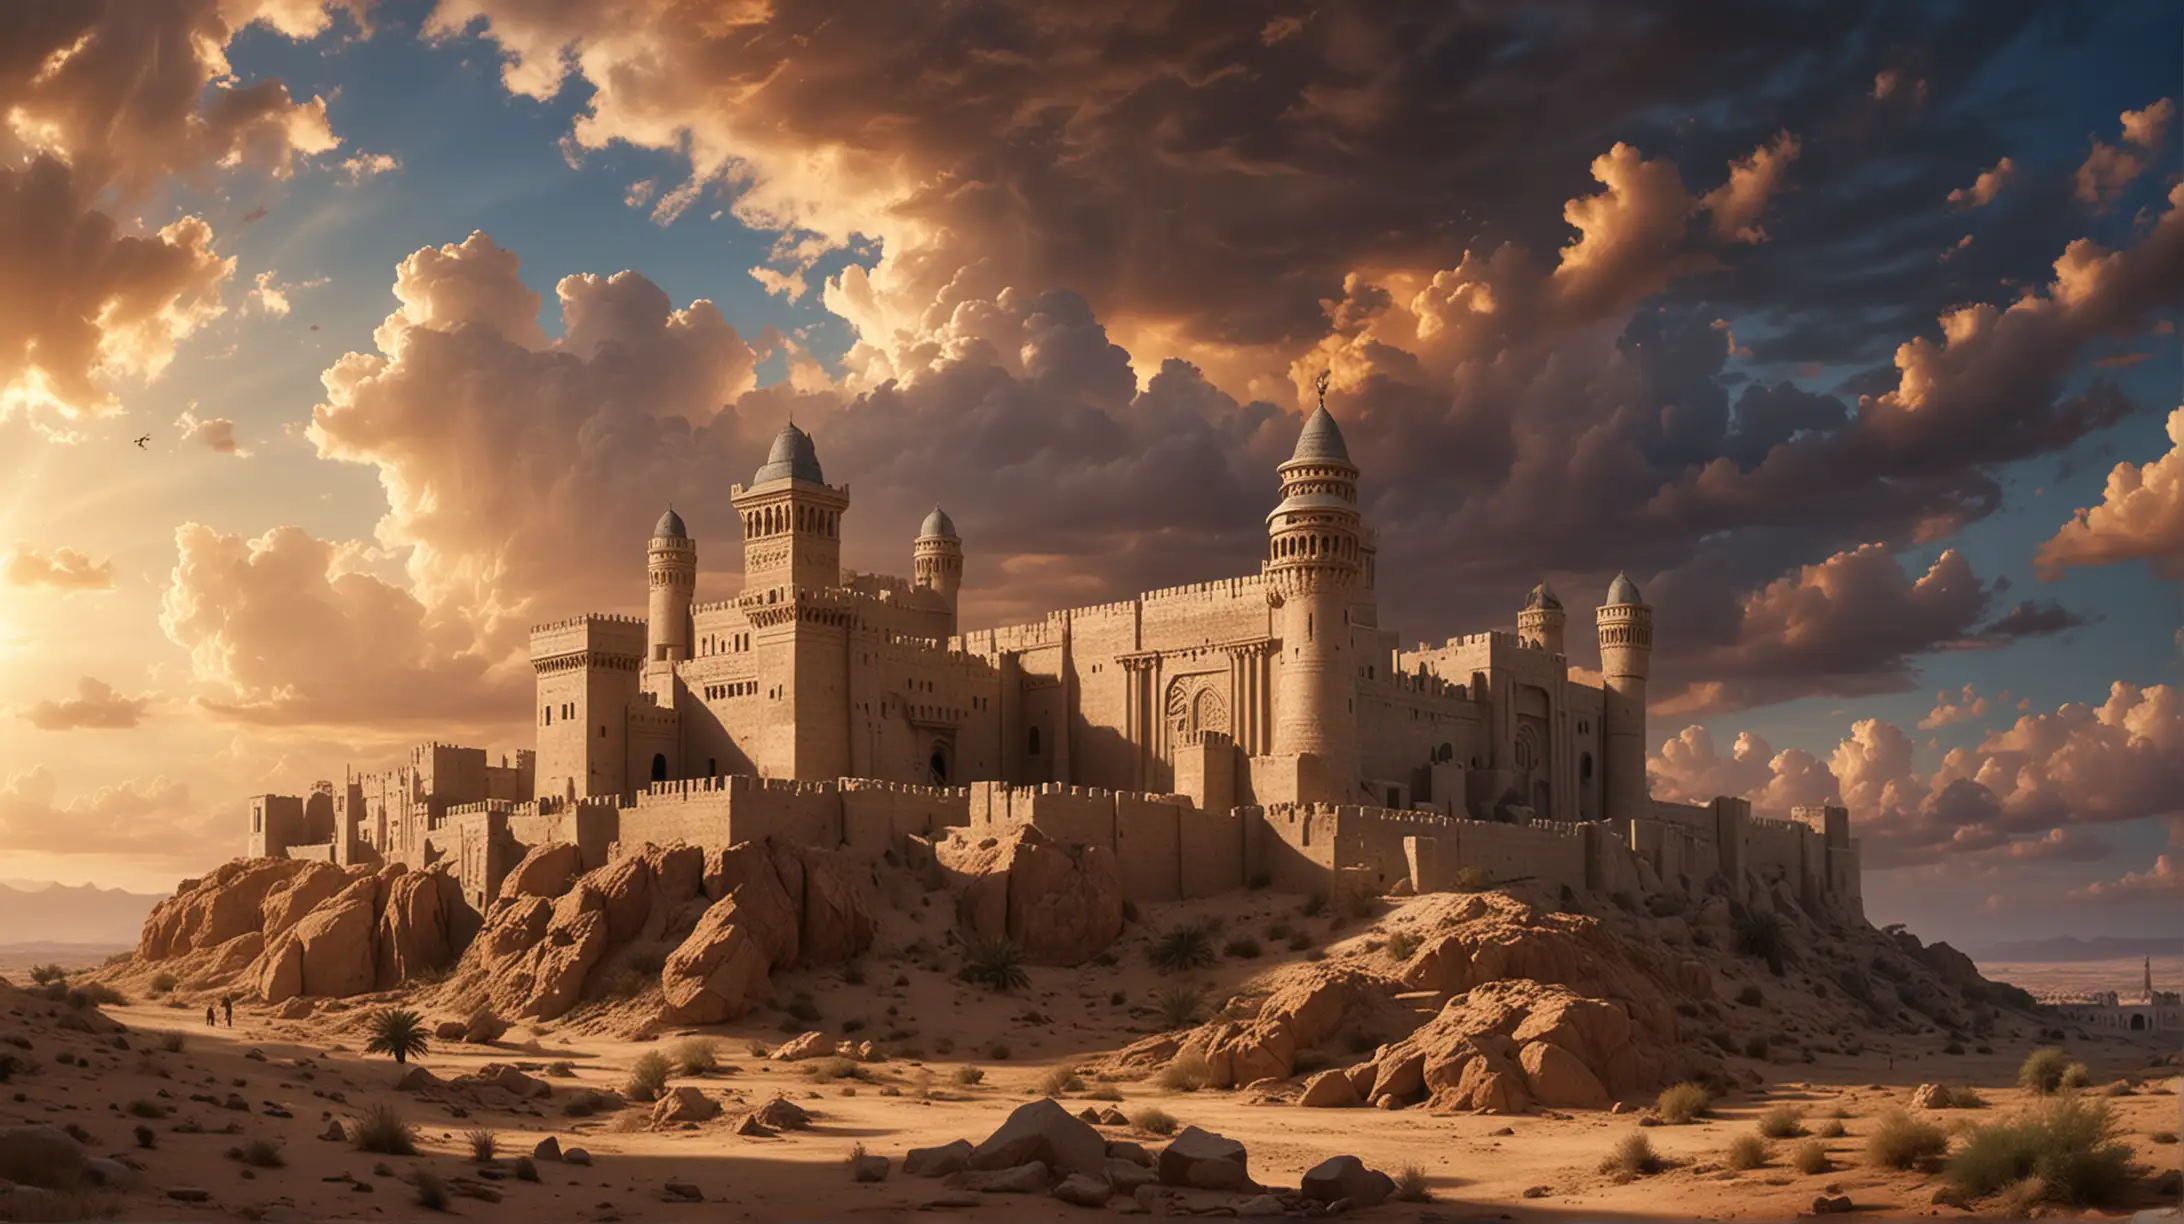 Fortified Desert City with Castle and Jewish Temple Under Magnificent Sky